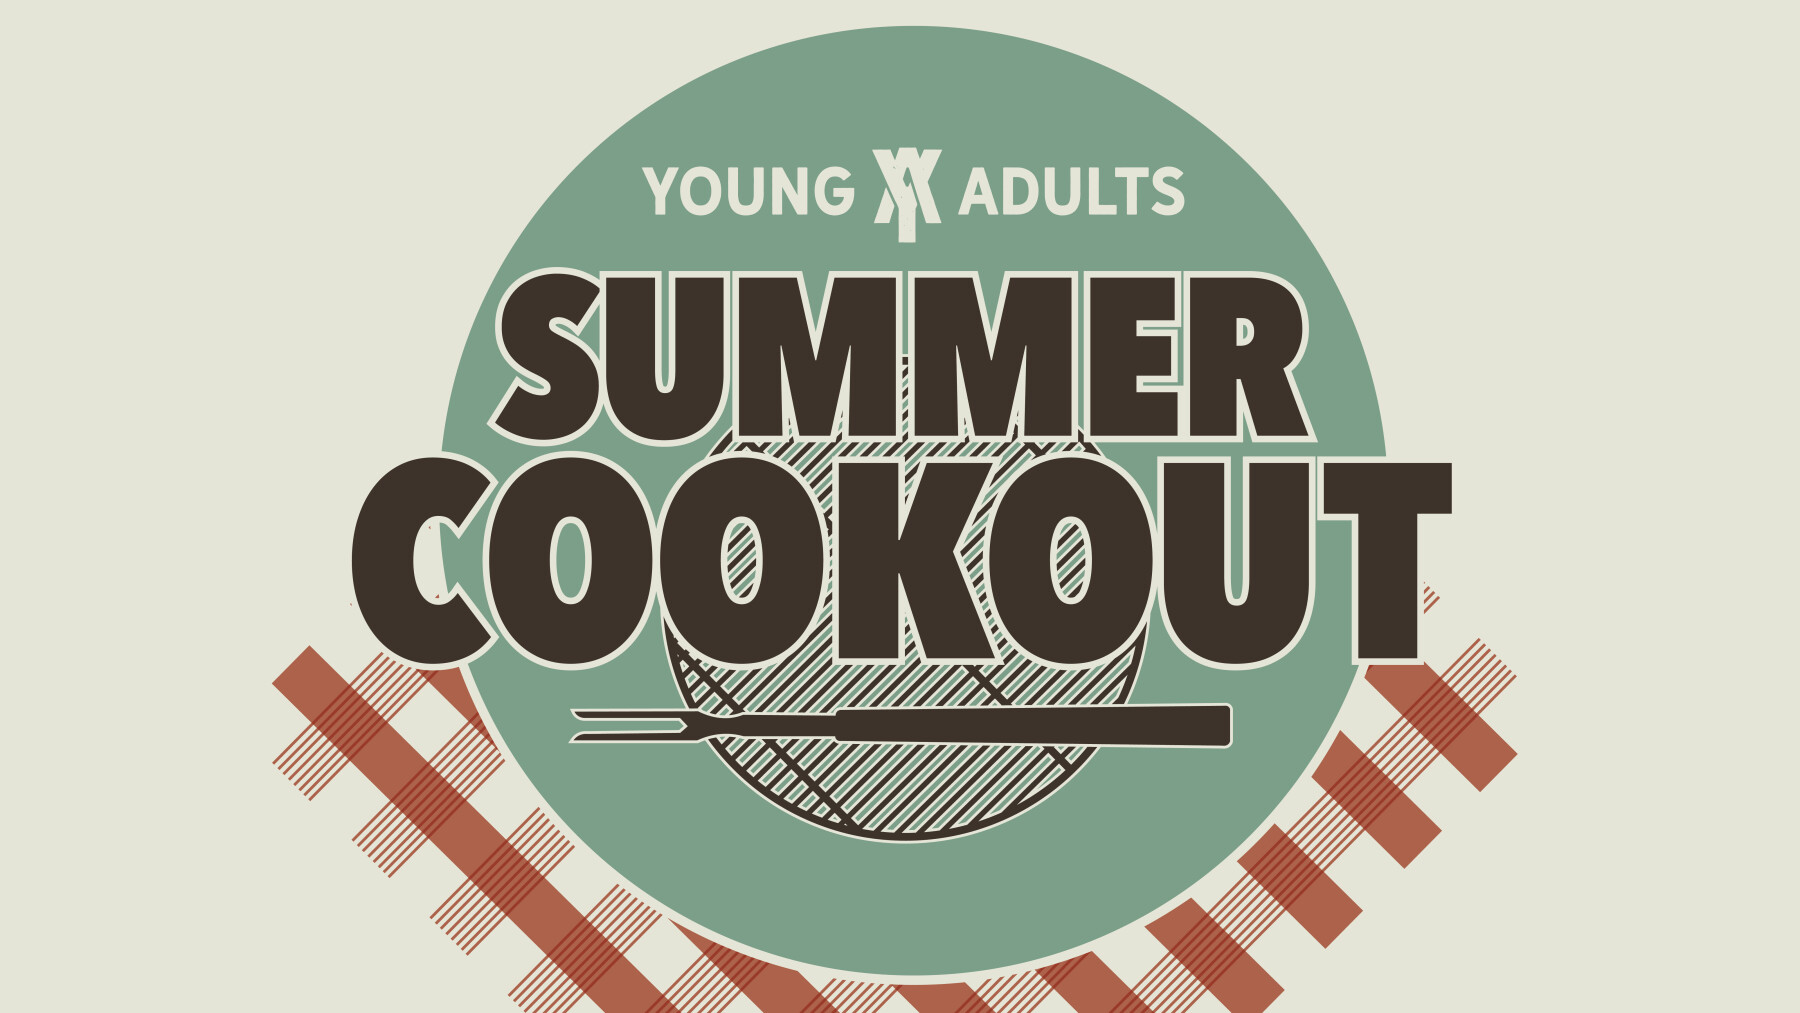 Young Adults Summer Cookout 